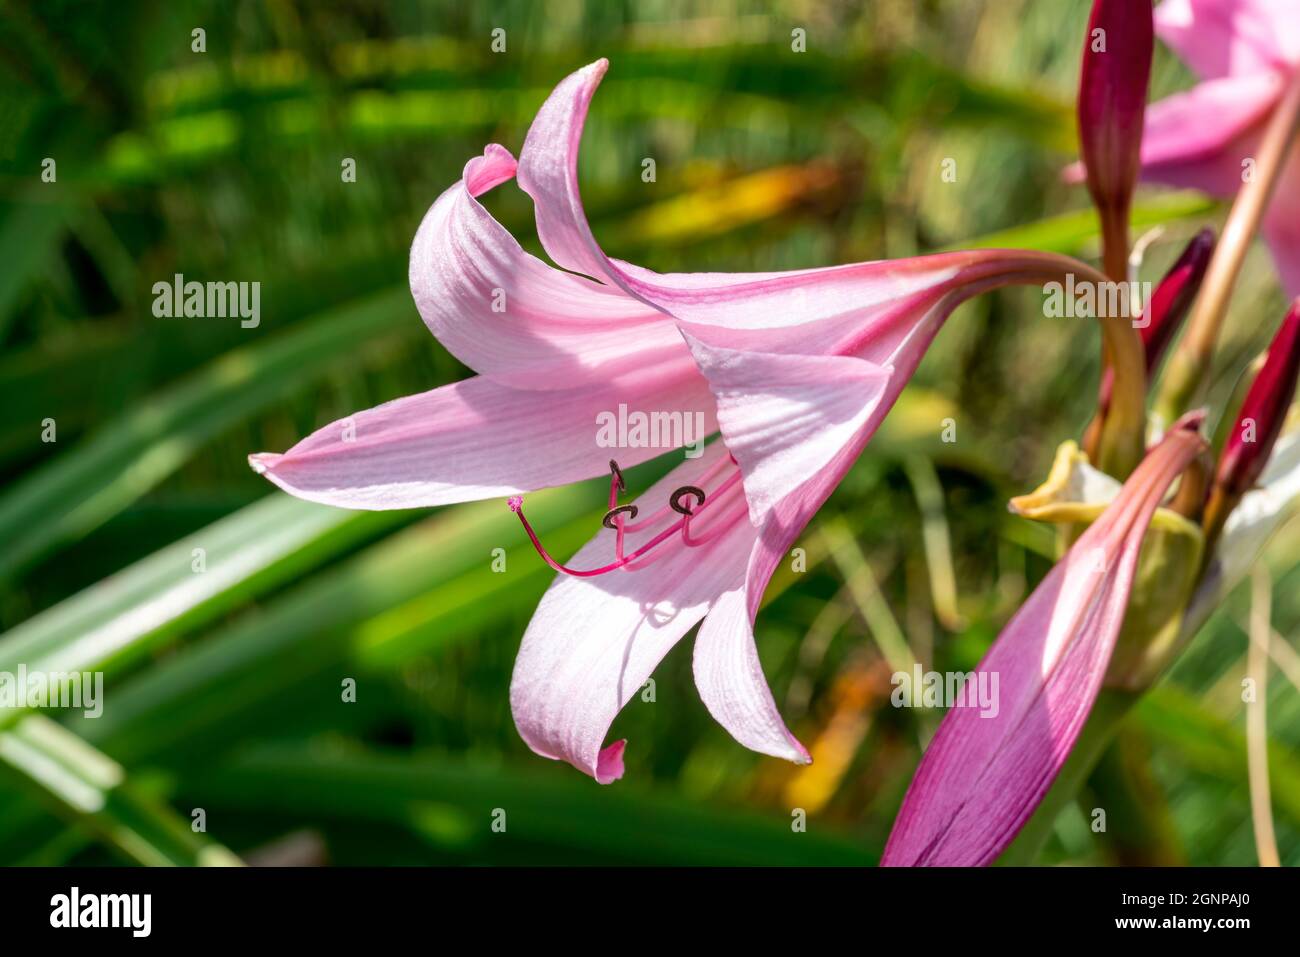 Crinum x Powellii a summer autumn fall flowering bulbous plant with a pink trumpet like summertime flower commonly known as swamp lily, stock photo im Stock Photo